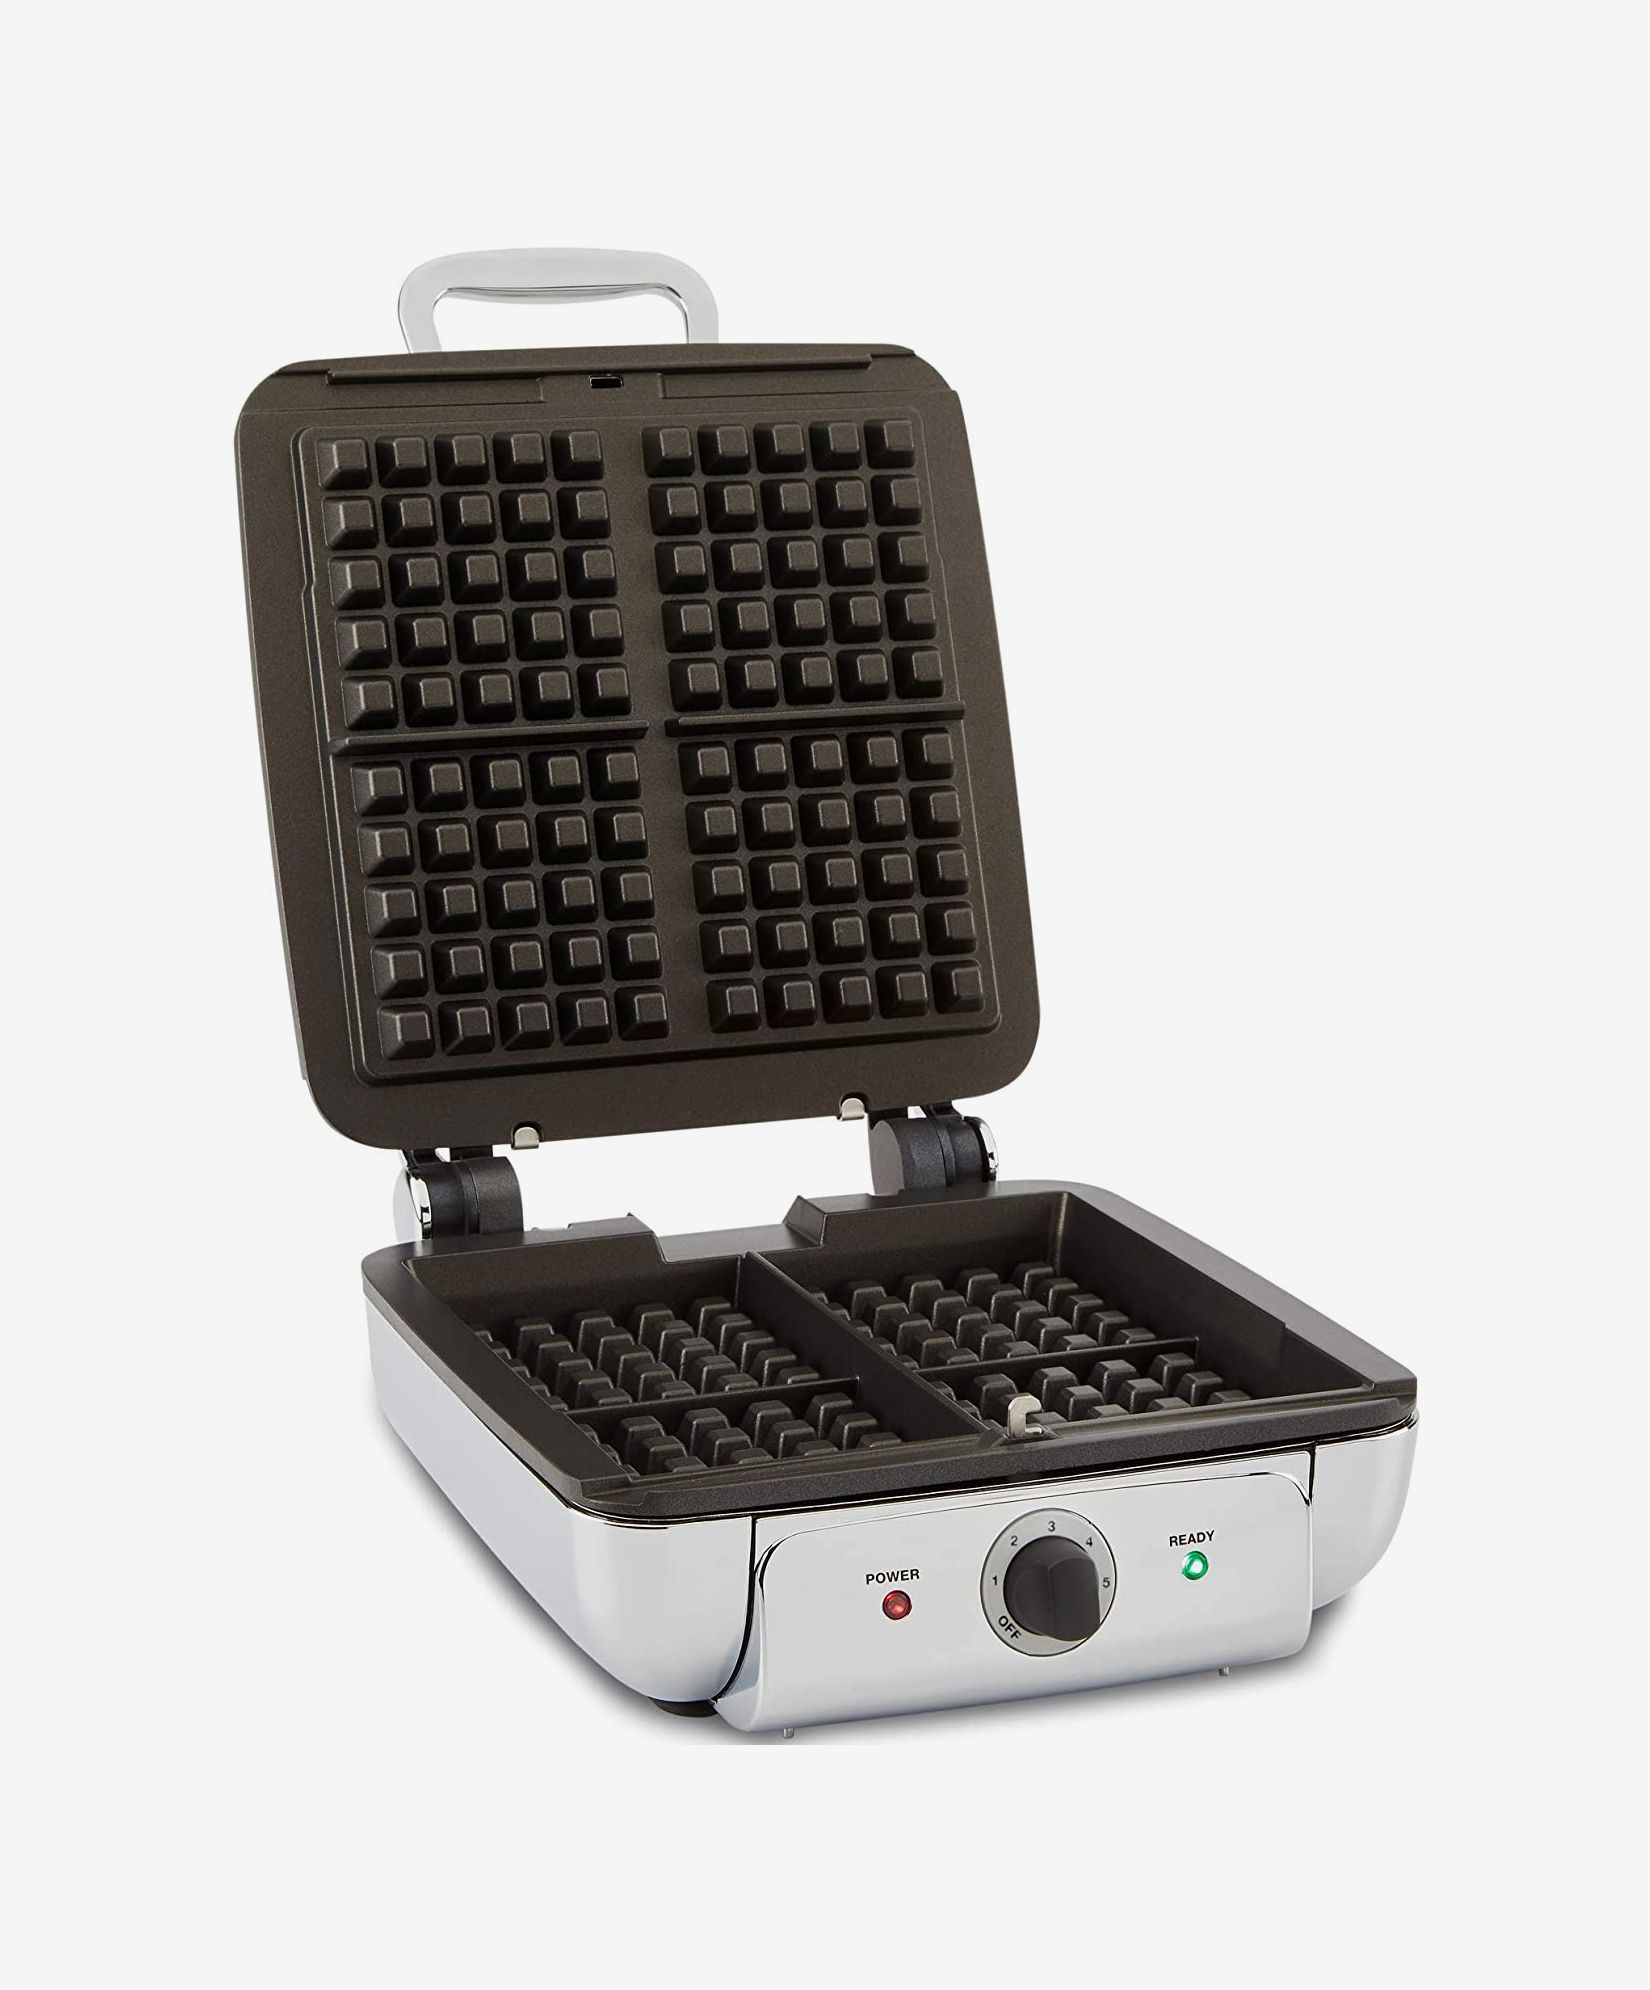 12 Best Waffle Makers in 2023 - Top Waffle Irons